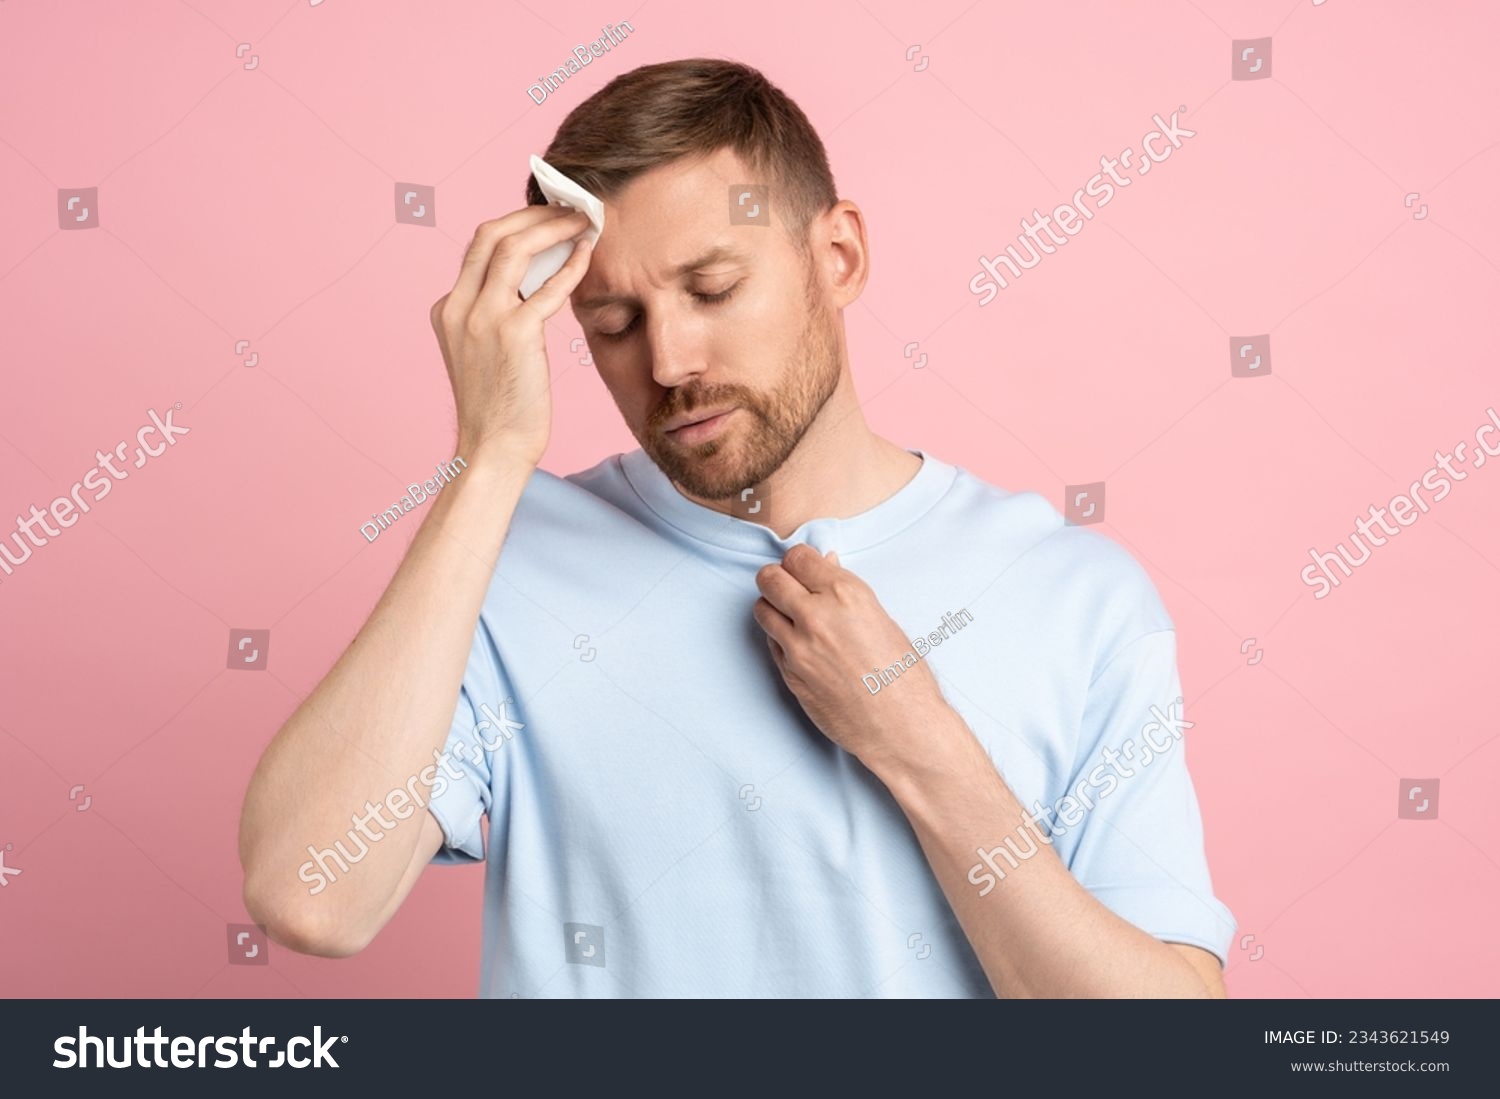 Man suffering from heat stuffiness wiping sweat on forehead with paper napkin isolated on pink background. Exhausted overheated bearded male with closed eyes. Summer hot weather, stuffy room concept. #2343621549